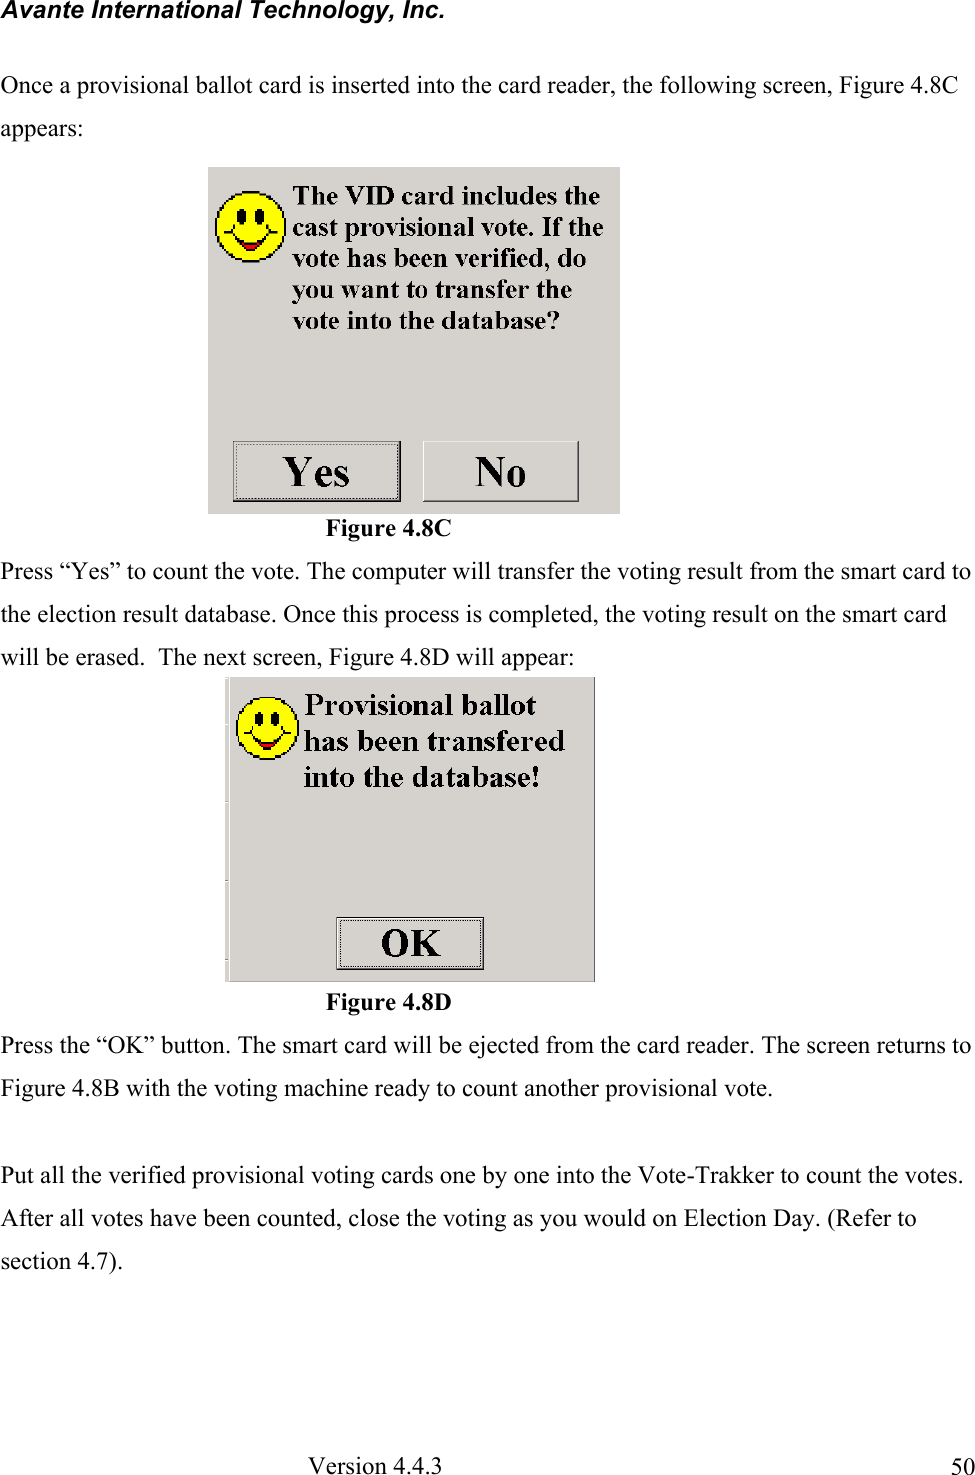 Avante International Technology, Inc.  Version 4.4.3  50Once a provisional ballot card is inserted into the card reader, the following screen, Figure 4.8C appears:                                                     Figure 4.8C Press “Yes” to count the vote. The computer will transfer the voting result from the smart card to the election result database. Once this process is completed, the voting result on the smart card will be erased.  The next screen, Figure 4.8D will appear:                                                            Figure 4.8D Press the “OK” button. The smart card will be ejected from the card reader. The screen returns to Figure 4.8B with the voting machine ready to count another provisional vote.  Put all the verified provisional voting cards one by one into the Vote-Trakker to count the votes.  After all votes have been counted, close the voting as you would on Election Day. (Refer to section 4.7).  